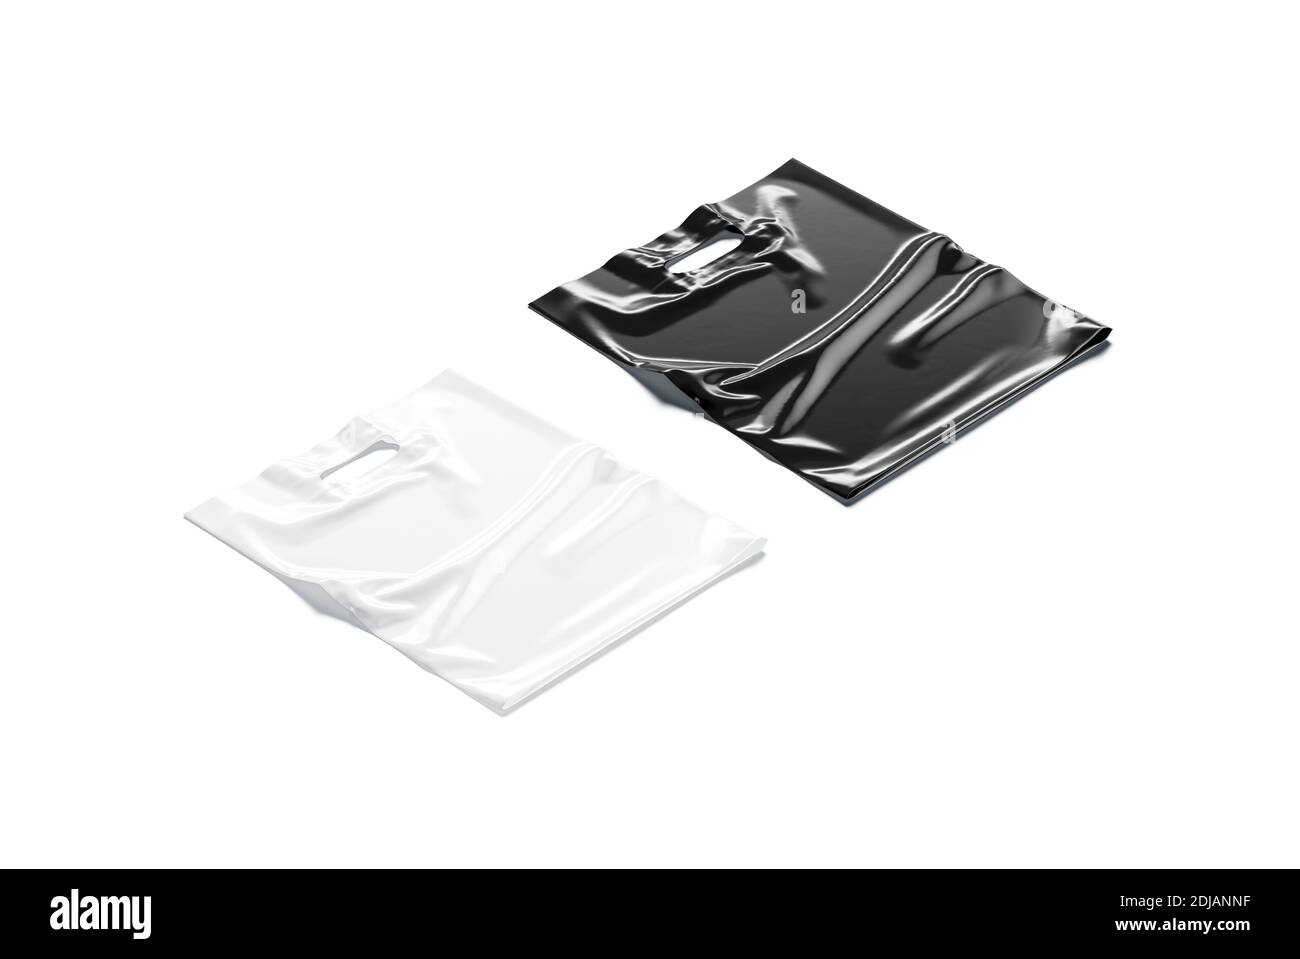 blank black and white die cut plastic bag handle hole mockup 3d rendering empty polythene rectangle package mock up side view isolated clear wrap 2DJANNF